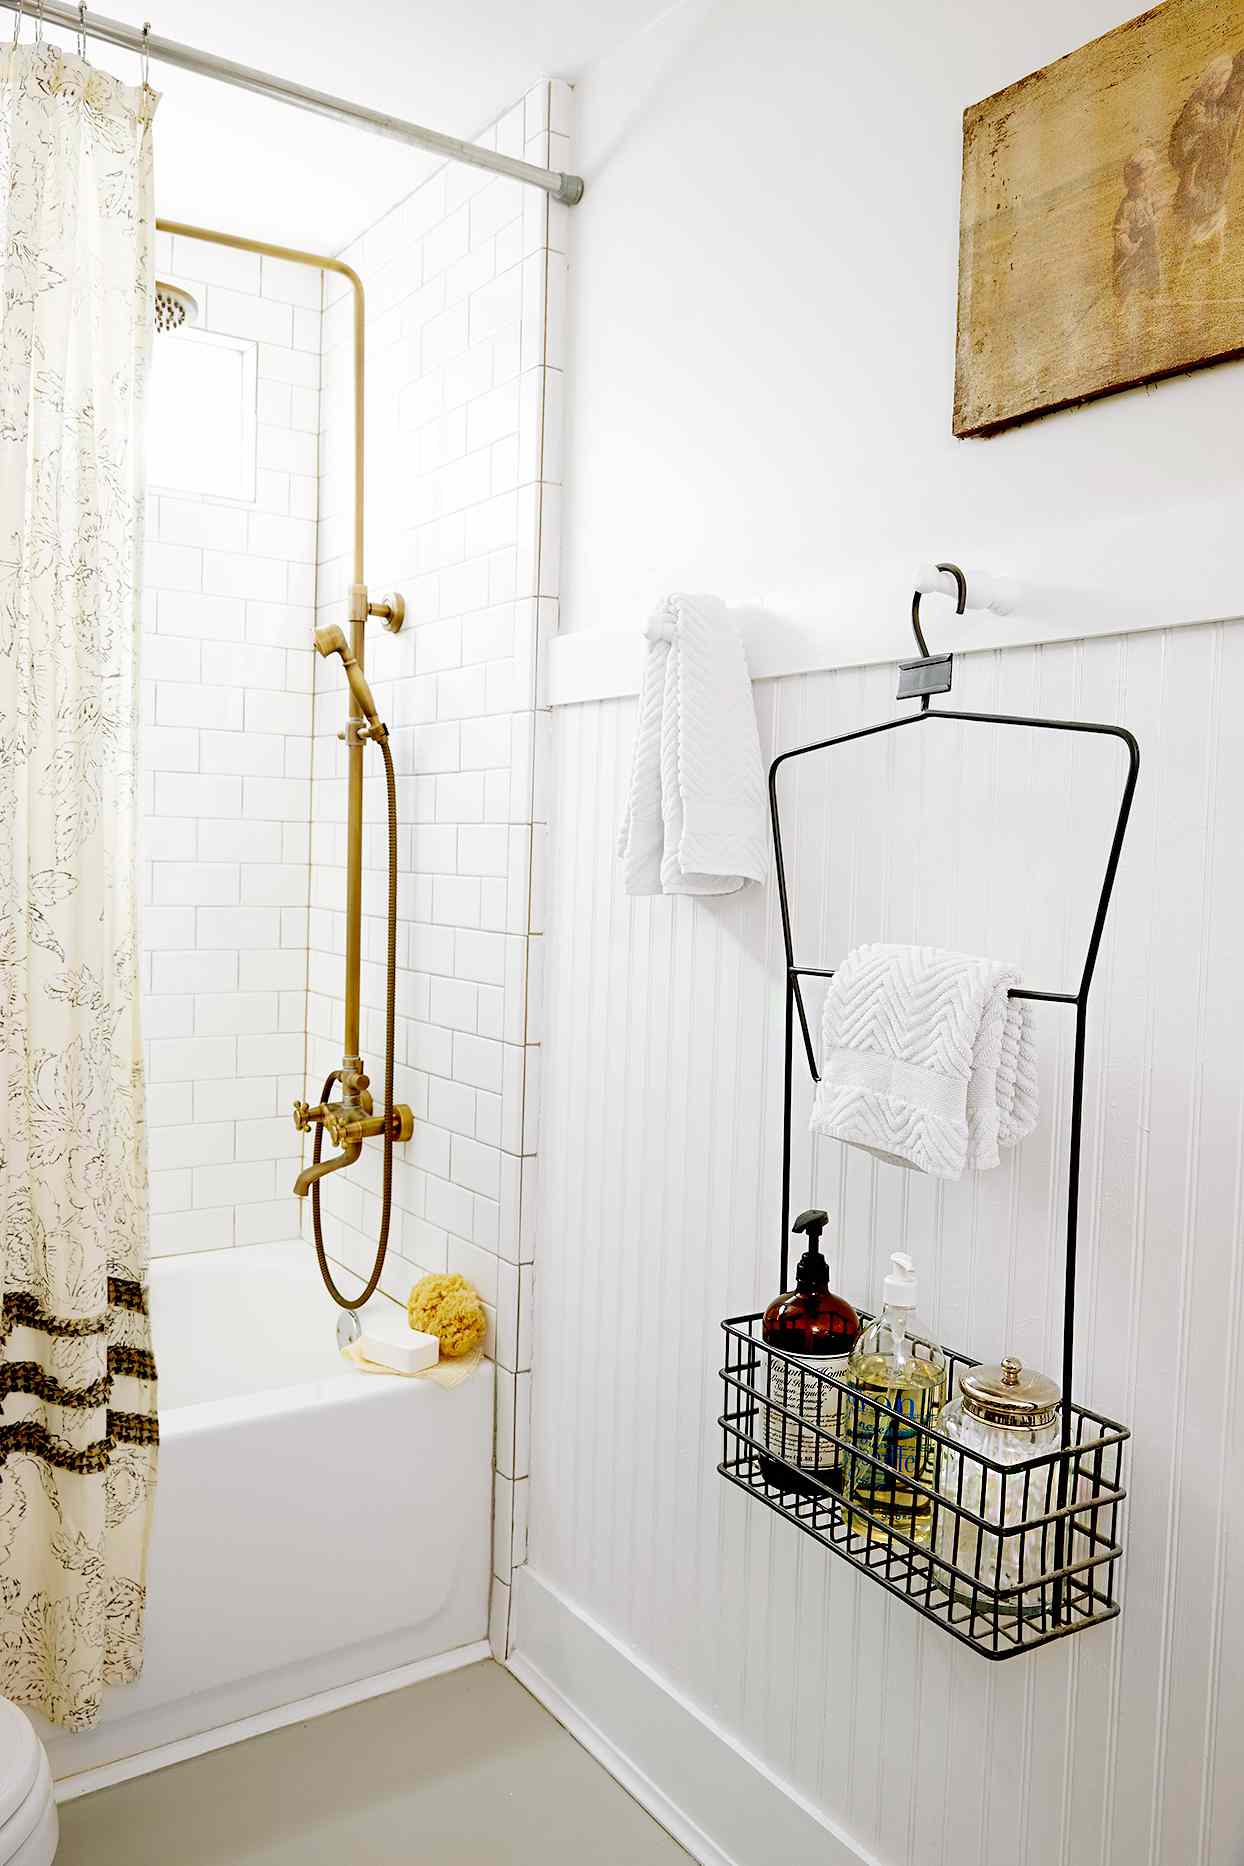 Shower with caddy on wall